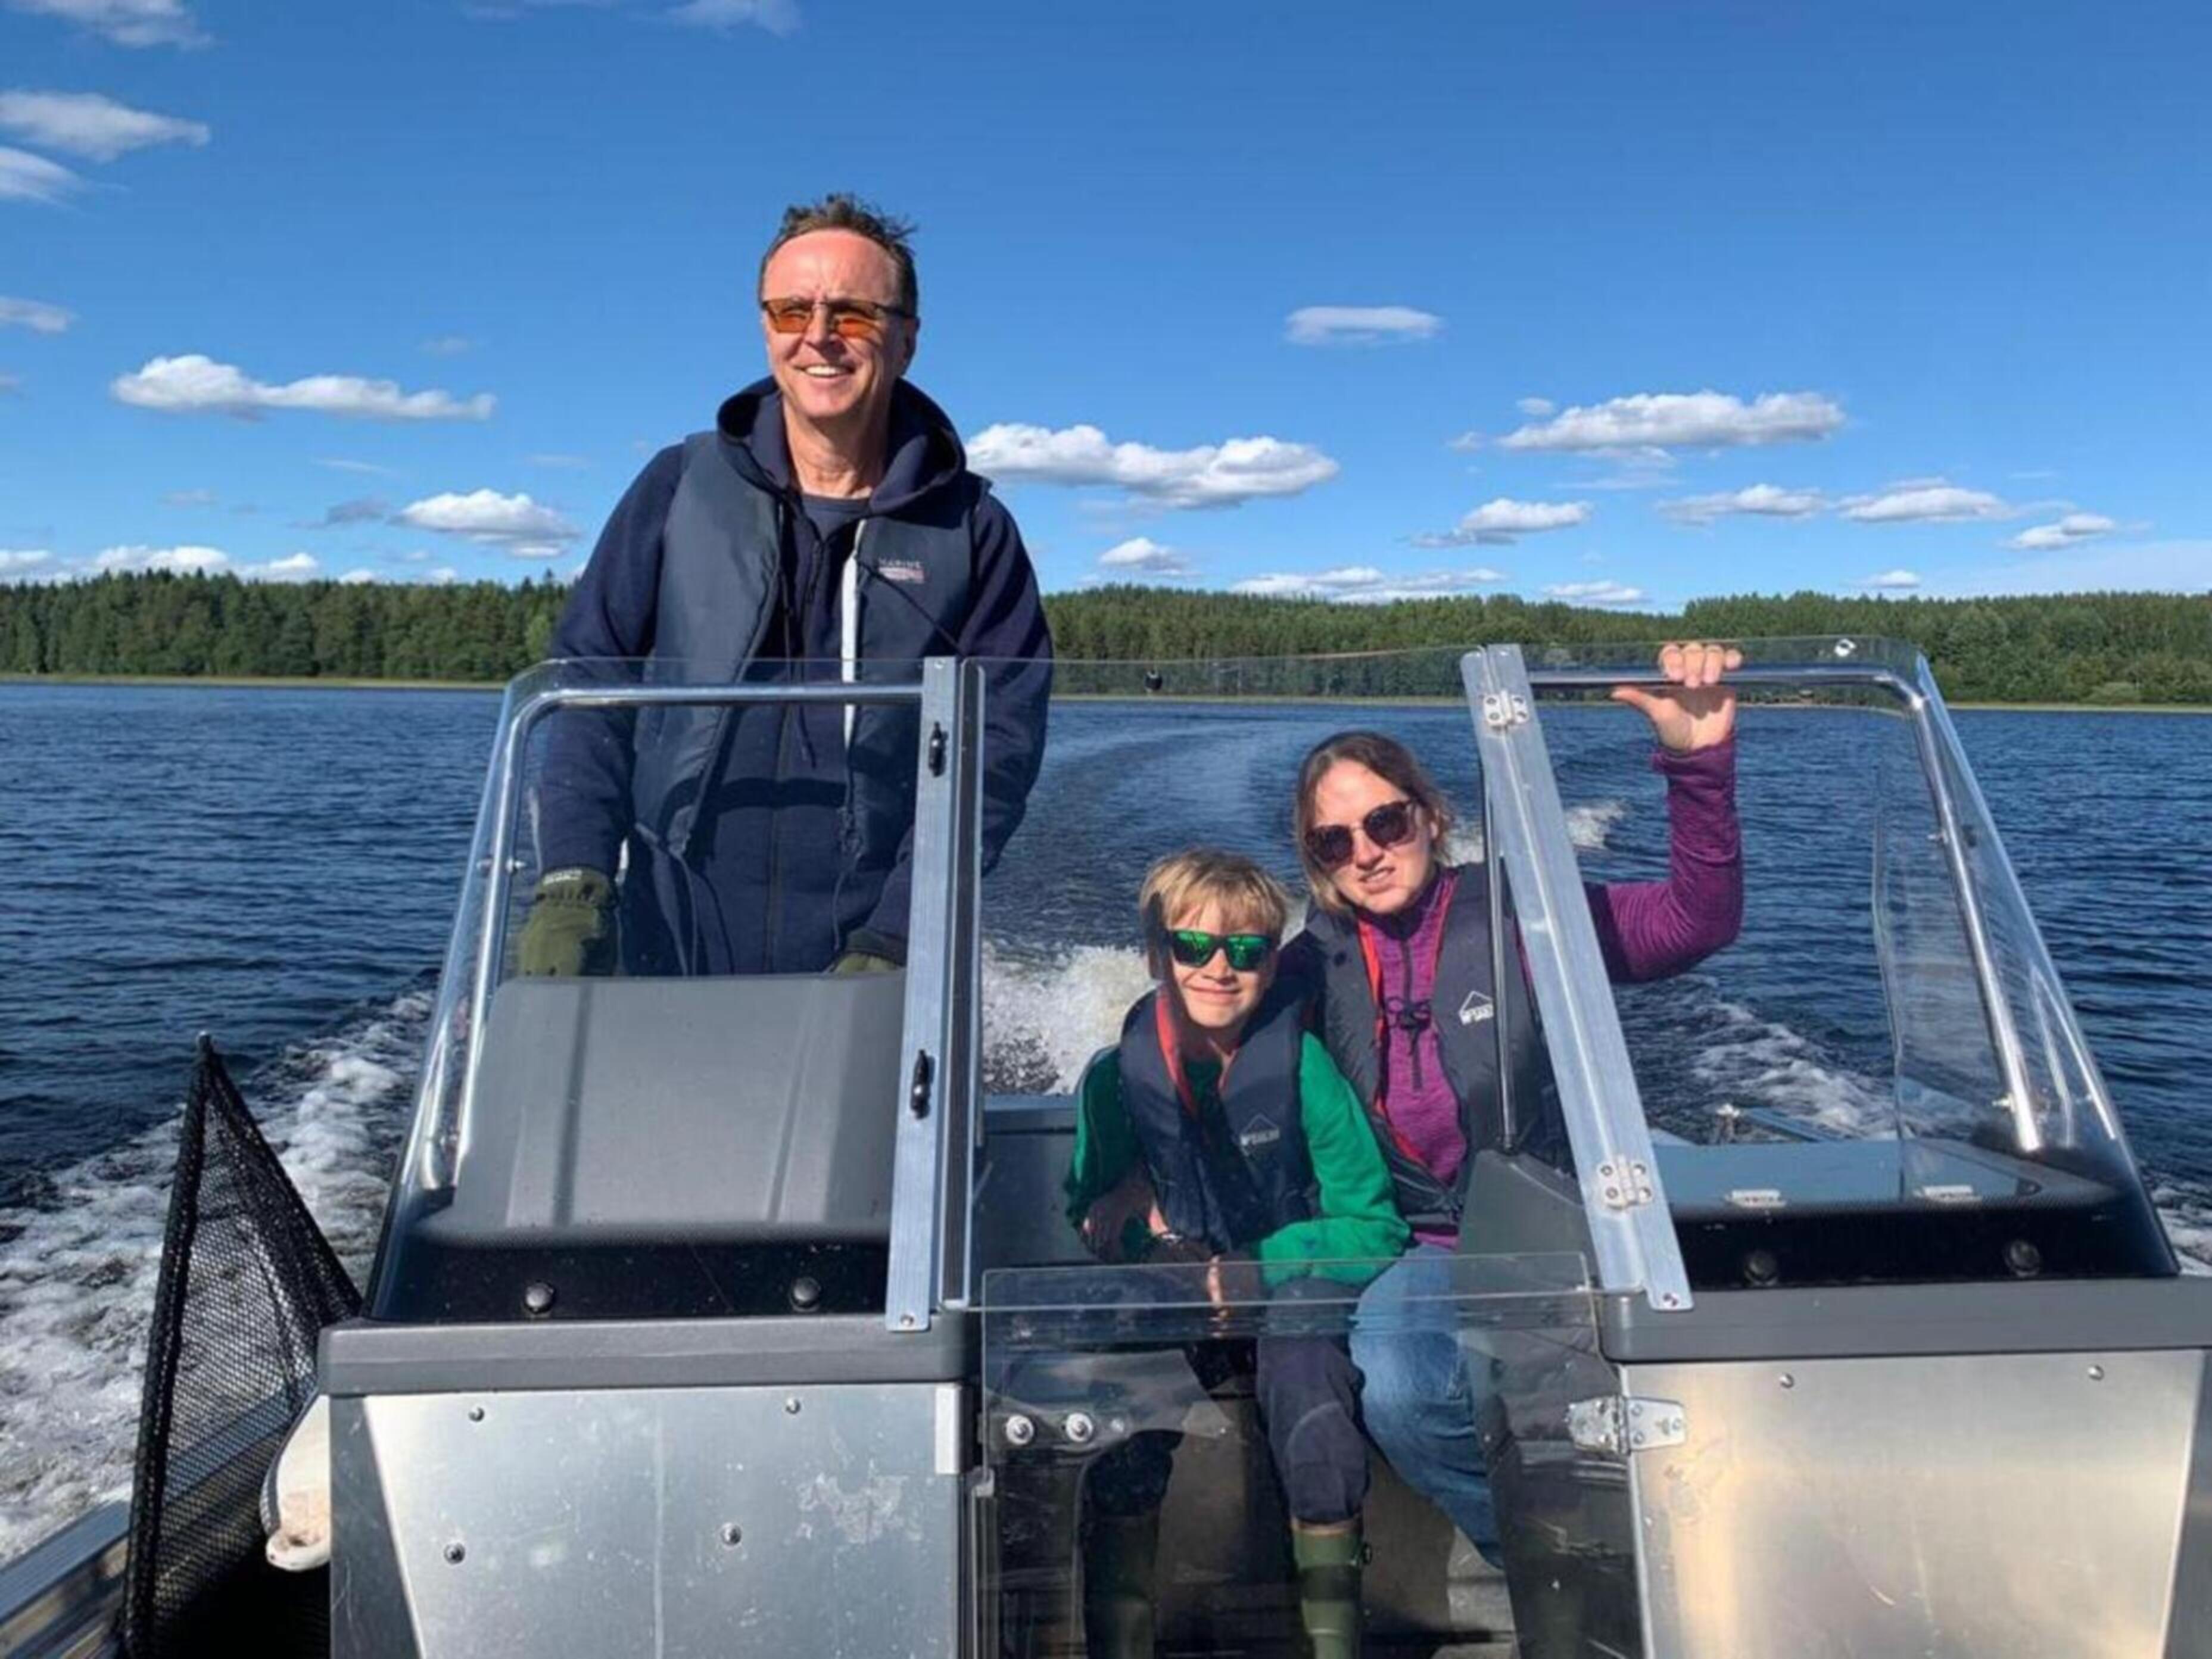 <p>Saimaa Lakeside cottages is the best place for fishing in Finland.&nbsp;</p>
<p><strong>Every cottage has:&nbsp;</strong></p>
<p>&bull; Private shoreline</p>
<p>&bull; Private pier where you can fish&nbsp;</p>
<p>&bull; Boat with electric motor free of charge (battery is charged on the terrace)</p>
<p>&bull; Float rods for fishing (please inform in advance)</p>
<p>&bull; Life jackets</p>
<p>We will provide you with a fishing license which is available in waters of our reservoir &ndash; no extra charge is required. If you plan to fish away from the cottages, you can apply for a license online at <span style="color: #0000ff;"><a style="color: #0000ff;" href="https://www.eraluvat.fi/en/fishing/fisheries-management-fee.html" target="_blank" rel="noopener">https://www.eraluvat.fi/</a></span> or at R-kioski shops in the nearest village (e.g. Imatra, Lapentie 16). The cost of the license is 6 &euro; per day, 16 &euro; per week and 47 &euro; per year. Prices may be higher at kiosks in Finland.</p>
<p>&bull; Gas grill on the terrace and a wood-fired barbecue next to it, which will help you to cook your catch quickly</p>
<p><strong>Additionally you can:</strong></p>
<p>1. Rent a boat for fishing, including trolling (Buster with Yamaha 40 hp motor). The minimum rental cost is 2 days. The cost of renting a boat 250 euros / day (from 2 to 4 days); 200 euros / day (5-6 days); 180 euros / day (from 7 days and more) . Petrol is not included in the price.&nbsp;</p>
<p>2. Rent professional tackle from our partners in Helsinki, taking in mind the peculiarities of the season and water area. Please inform us especially if you start your trip from Helsinki.</p>
<p>3. Book in advance a set for fishing: spinning with reel and fishing line, a set of tacks with leashes in a storage container. The cost of the set is 100 euros. Ideal for fishing on our lake. Compact and convenient. Then you can take it with you. You can easily cathc tench, bream, pike, perch, yaz, roach.</p>
<p>4. If you want to fish with a net. Ask us in advance and we will provide with it. We have a special license for net fishing.&nbsp;</p>
<p>5. Go fishing with a professional guide. There are various options here:</p>
<ul>
<li><strong>Fishing on Lake Saimaa.</strong> Different options can be offered: either near by the cottage or go closer to Imatra. Fishing is possible from the boat by spinning, rod or line.</li>
</ul>
<p>Fish: in spring - pike, kumja (taimen), Saimaa salmon;&nbsp;</p>
<p>from the end of May to September - perch;&nbsp;</p>
<p>from June to August - pikeperch.</p>
<p>Cost of fishing (including guide, tackle, bait, licenses):</p>
<p>&nbsp;&nbsp;&nbsp;* for 4 hours (either morning or evening) - 300 euros for a group of 1 to 6 people;</p>
<p>&nbsp;&nbsp;&nbsp;* for 8 hours - 400 euros.</p>
<ul>
<li><strong>The rapids on Vuoksa (even winter fishing is possible).</strong></li>
</ul>
<p>Fishing from the shore or from a paddle boat is allowed (if from a boat, only 2 people + guide, if more people &ndash; turn by turn).</p>
<p>You can observe fish launching here in the water, so there will be a good catch all year round. Salmon, kumzha, rainbow trout, whitefish can be easily caught.</p>
<p>&nbsp;The cost is 125 euros/person (minimum 2 people).</p>
<ul>
<li><strong>Fishing trip to the Kymiyoki rapids in Kotka is the most salmon-rich river in Finland</strong>.</li>
</ul>
<p>Starting from the middle of June salmon come up to spawn; in autumn taimen and whitefish appear.</p>
<p>&nbsp;The cost is 150 euros/person for 5 hours (minimum 2 people).</p>
<p>&nbsp;It takes about 2.5 hours by car from the cottages to the rapids. Transfer is not included in the price</p>
<p><strong>Underwater hunting in rivers and lakes.</strong> Fishing for bream, pike, perch, yaz.</p>
<p>&nbsp;&nbsp;&nbsp;Price for fishing (excluding suit and equipment):</p>
<p>&nbsp;&nbsp;*250 euros for 4 hours (at choice - either in the morning or in the evening)</p>
<p>&nbsp;&nbsp;*350 euros for 4 hours at night</p>
<p>&nbsp;By the way, the photo shows guests of Saimaa Lakeside cottage complex on a trip on the lake on our boat Buster. Do you want the same wonderful emotions? Saimaa Lakeside cottages are the ideal place for fishing in Finland.</p>
<p>&nbsp;</p>